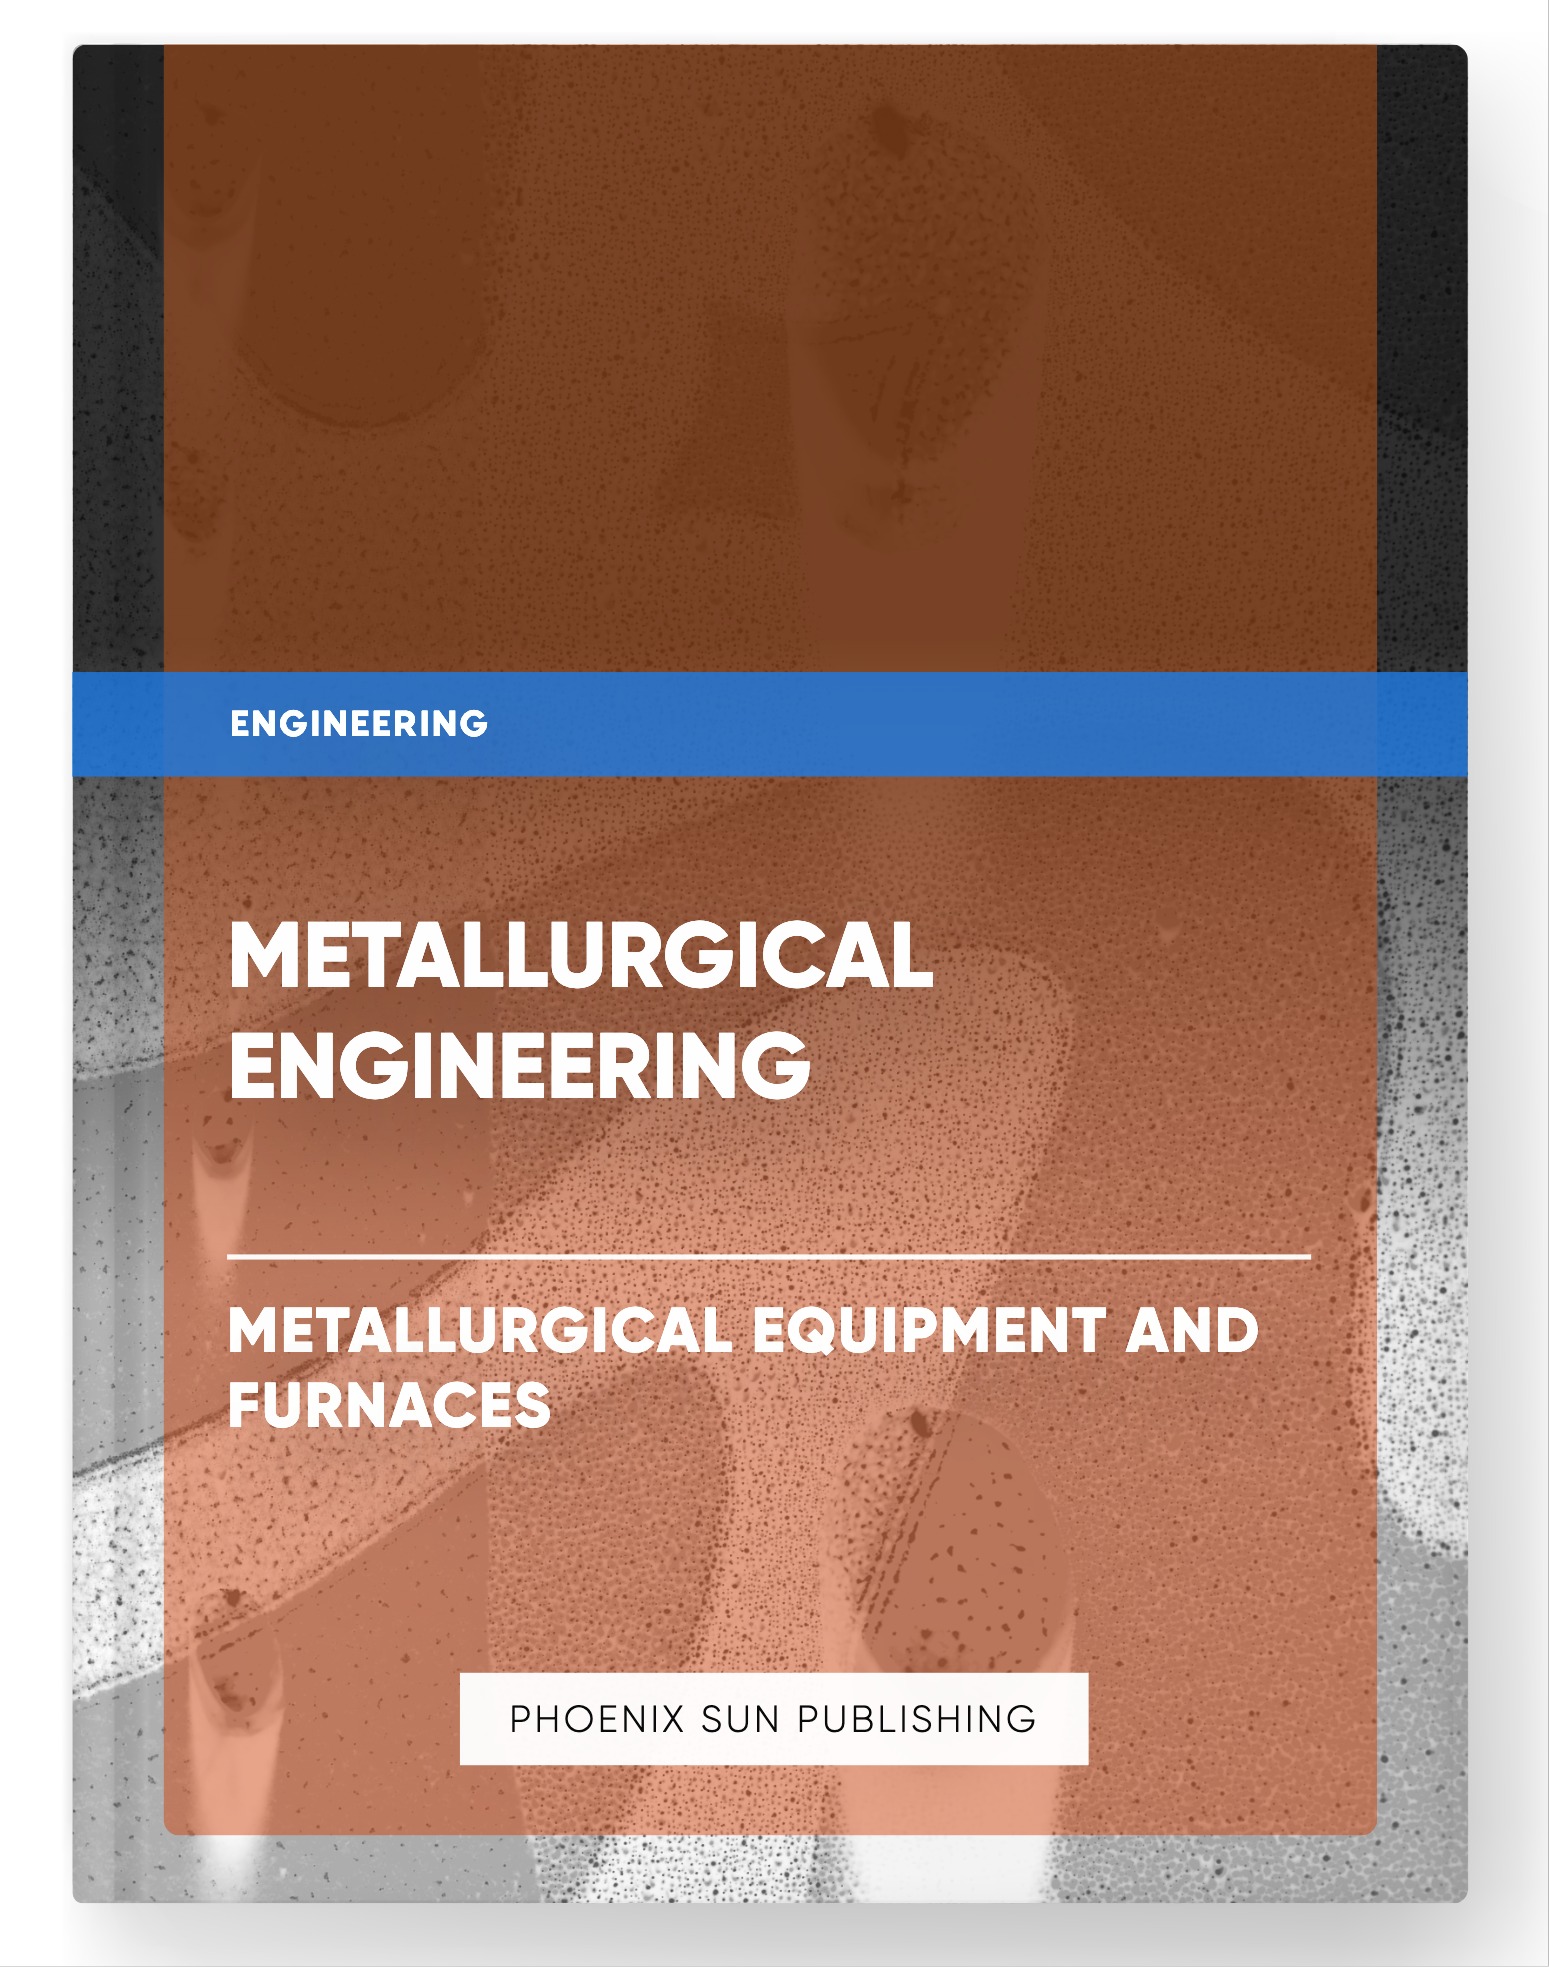 Metallurgical Engineering – Metallurgical Equipment and Furnaces